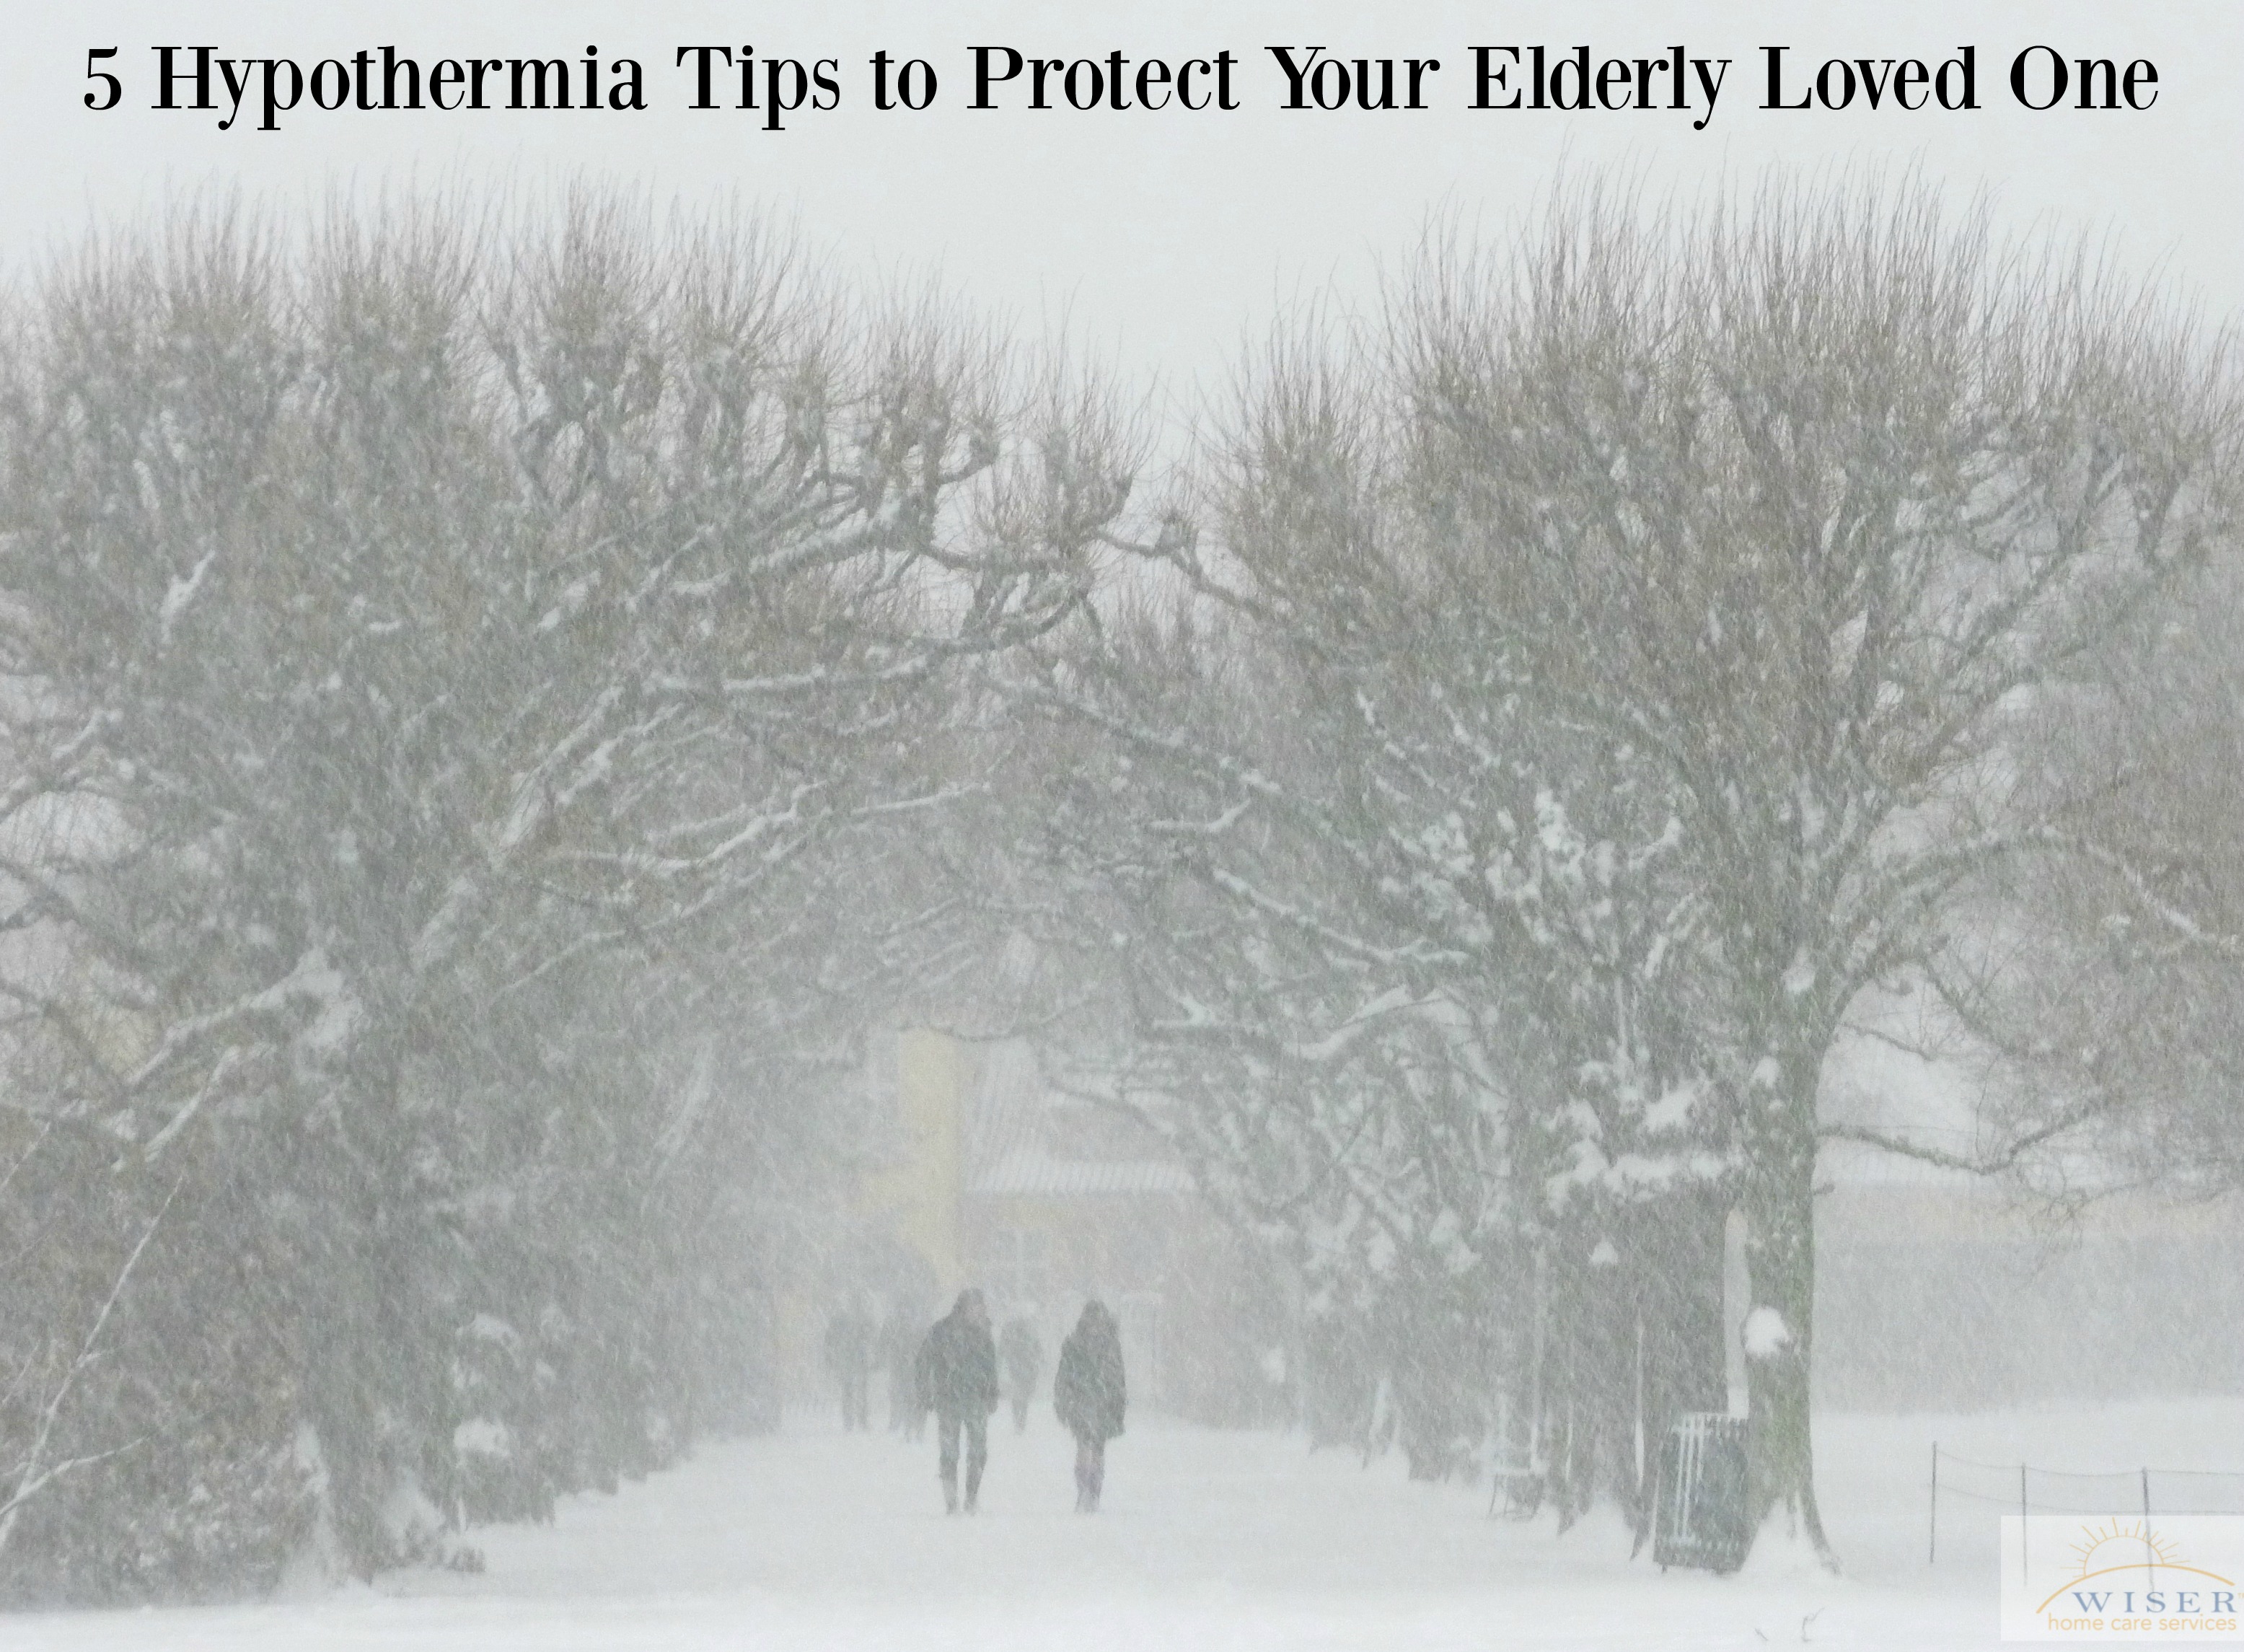 Winter is almost upon us and with it comes risks such as hypothermia. These hypothermia tips can save your elderly loved ones life.